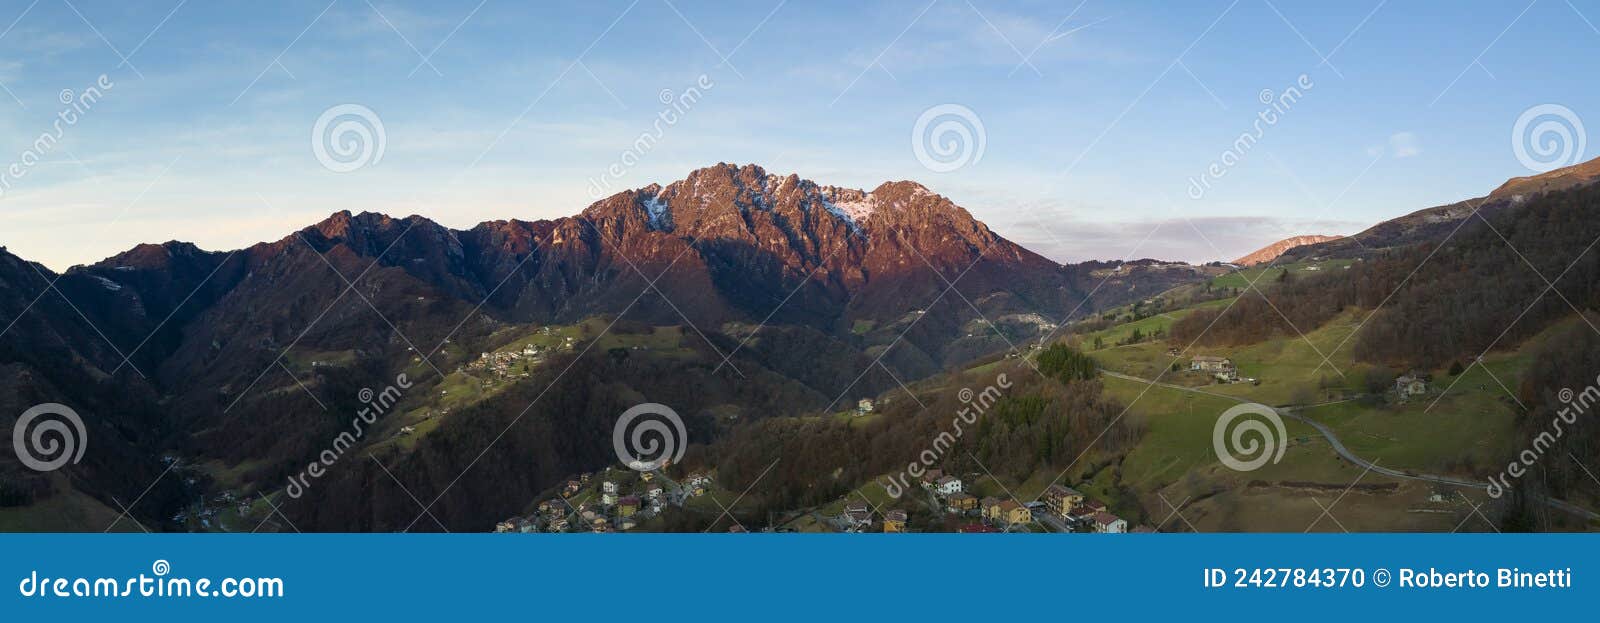 amazing landscape photo of the seriana valley and its mountains at sunrise